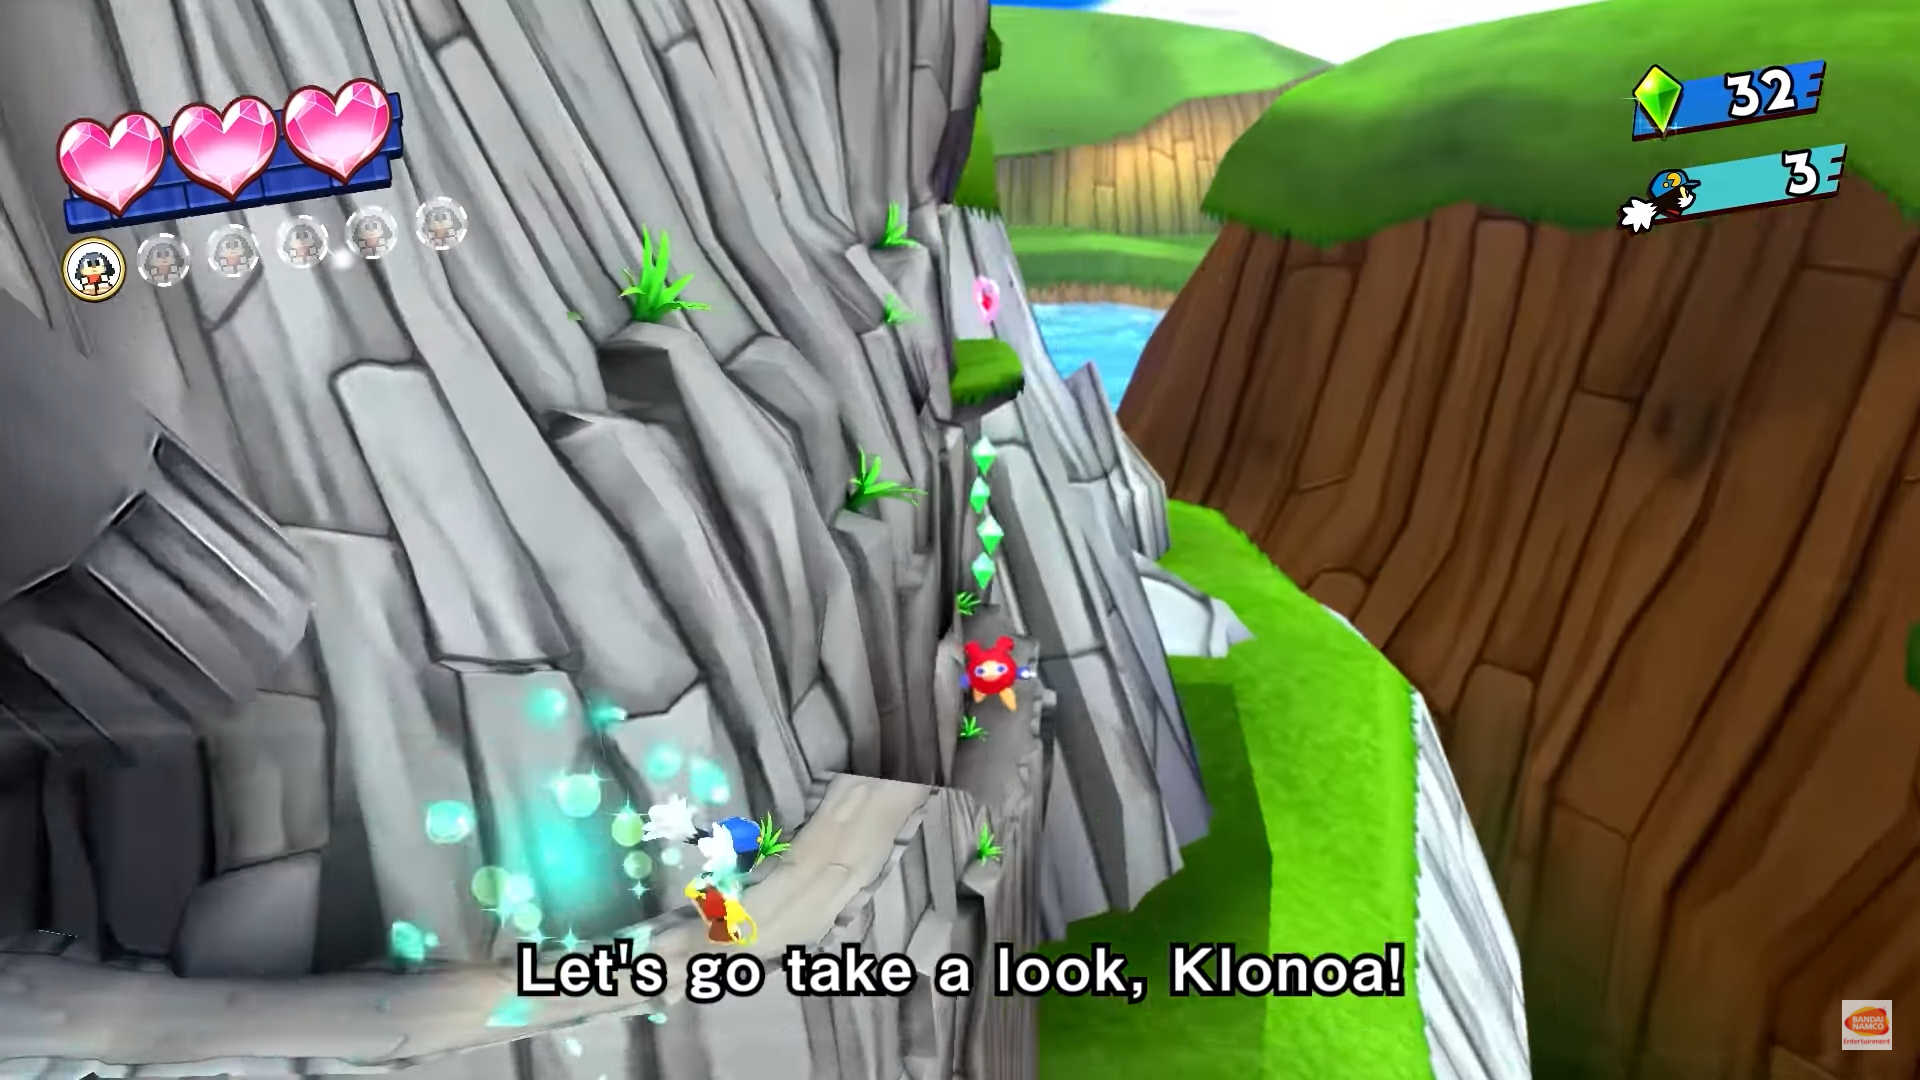 klonoa running up a mountain in the remaster